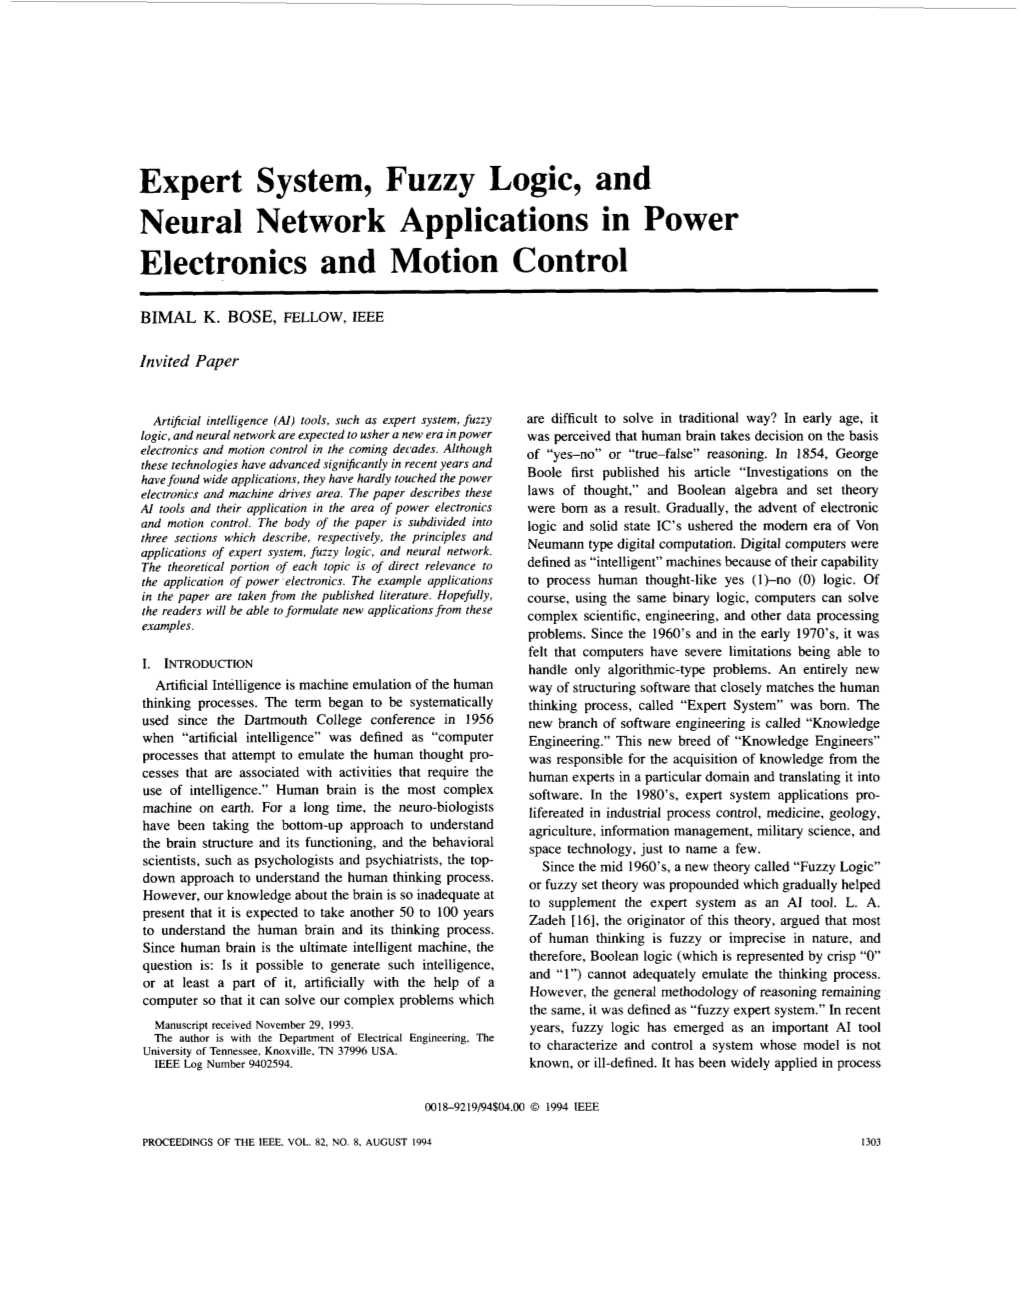 Expert System, Fuzzy Logic, and Neural Network Applications in Power Electronics and Motion Control